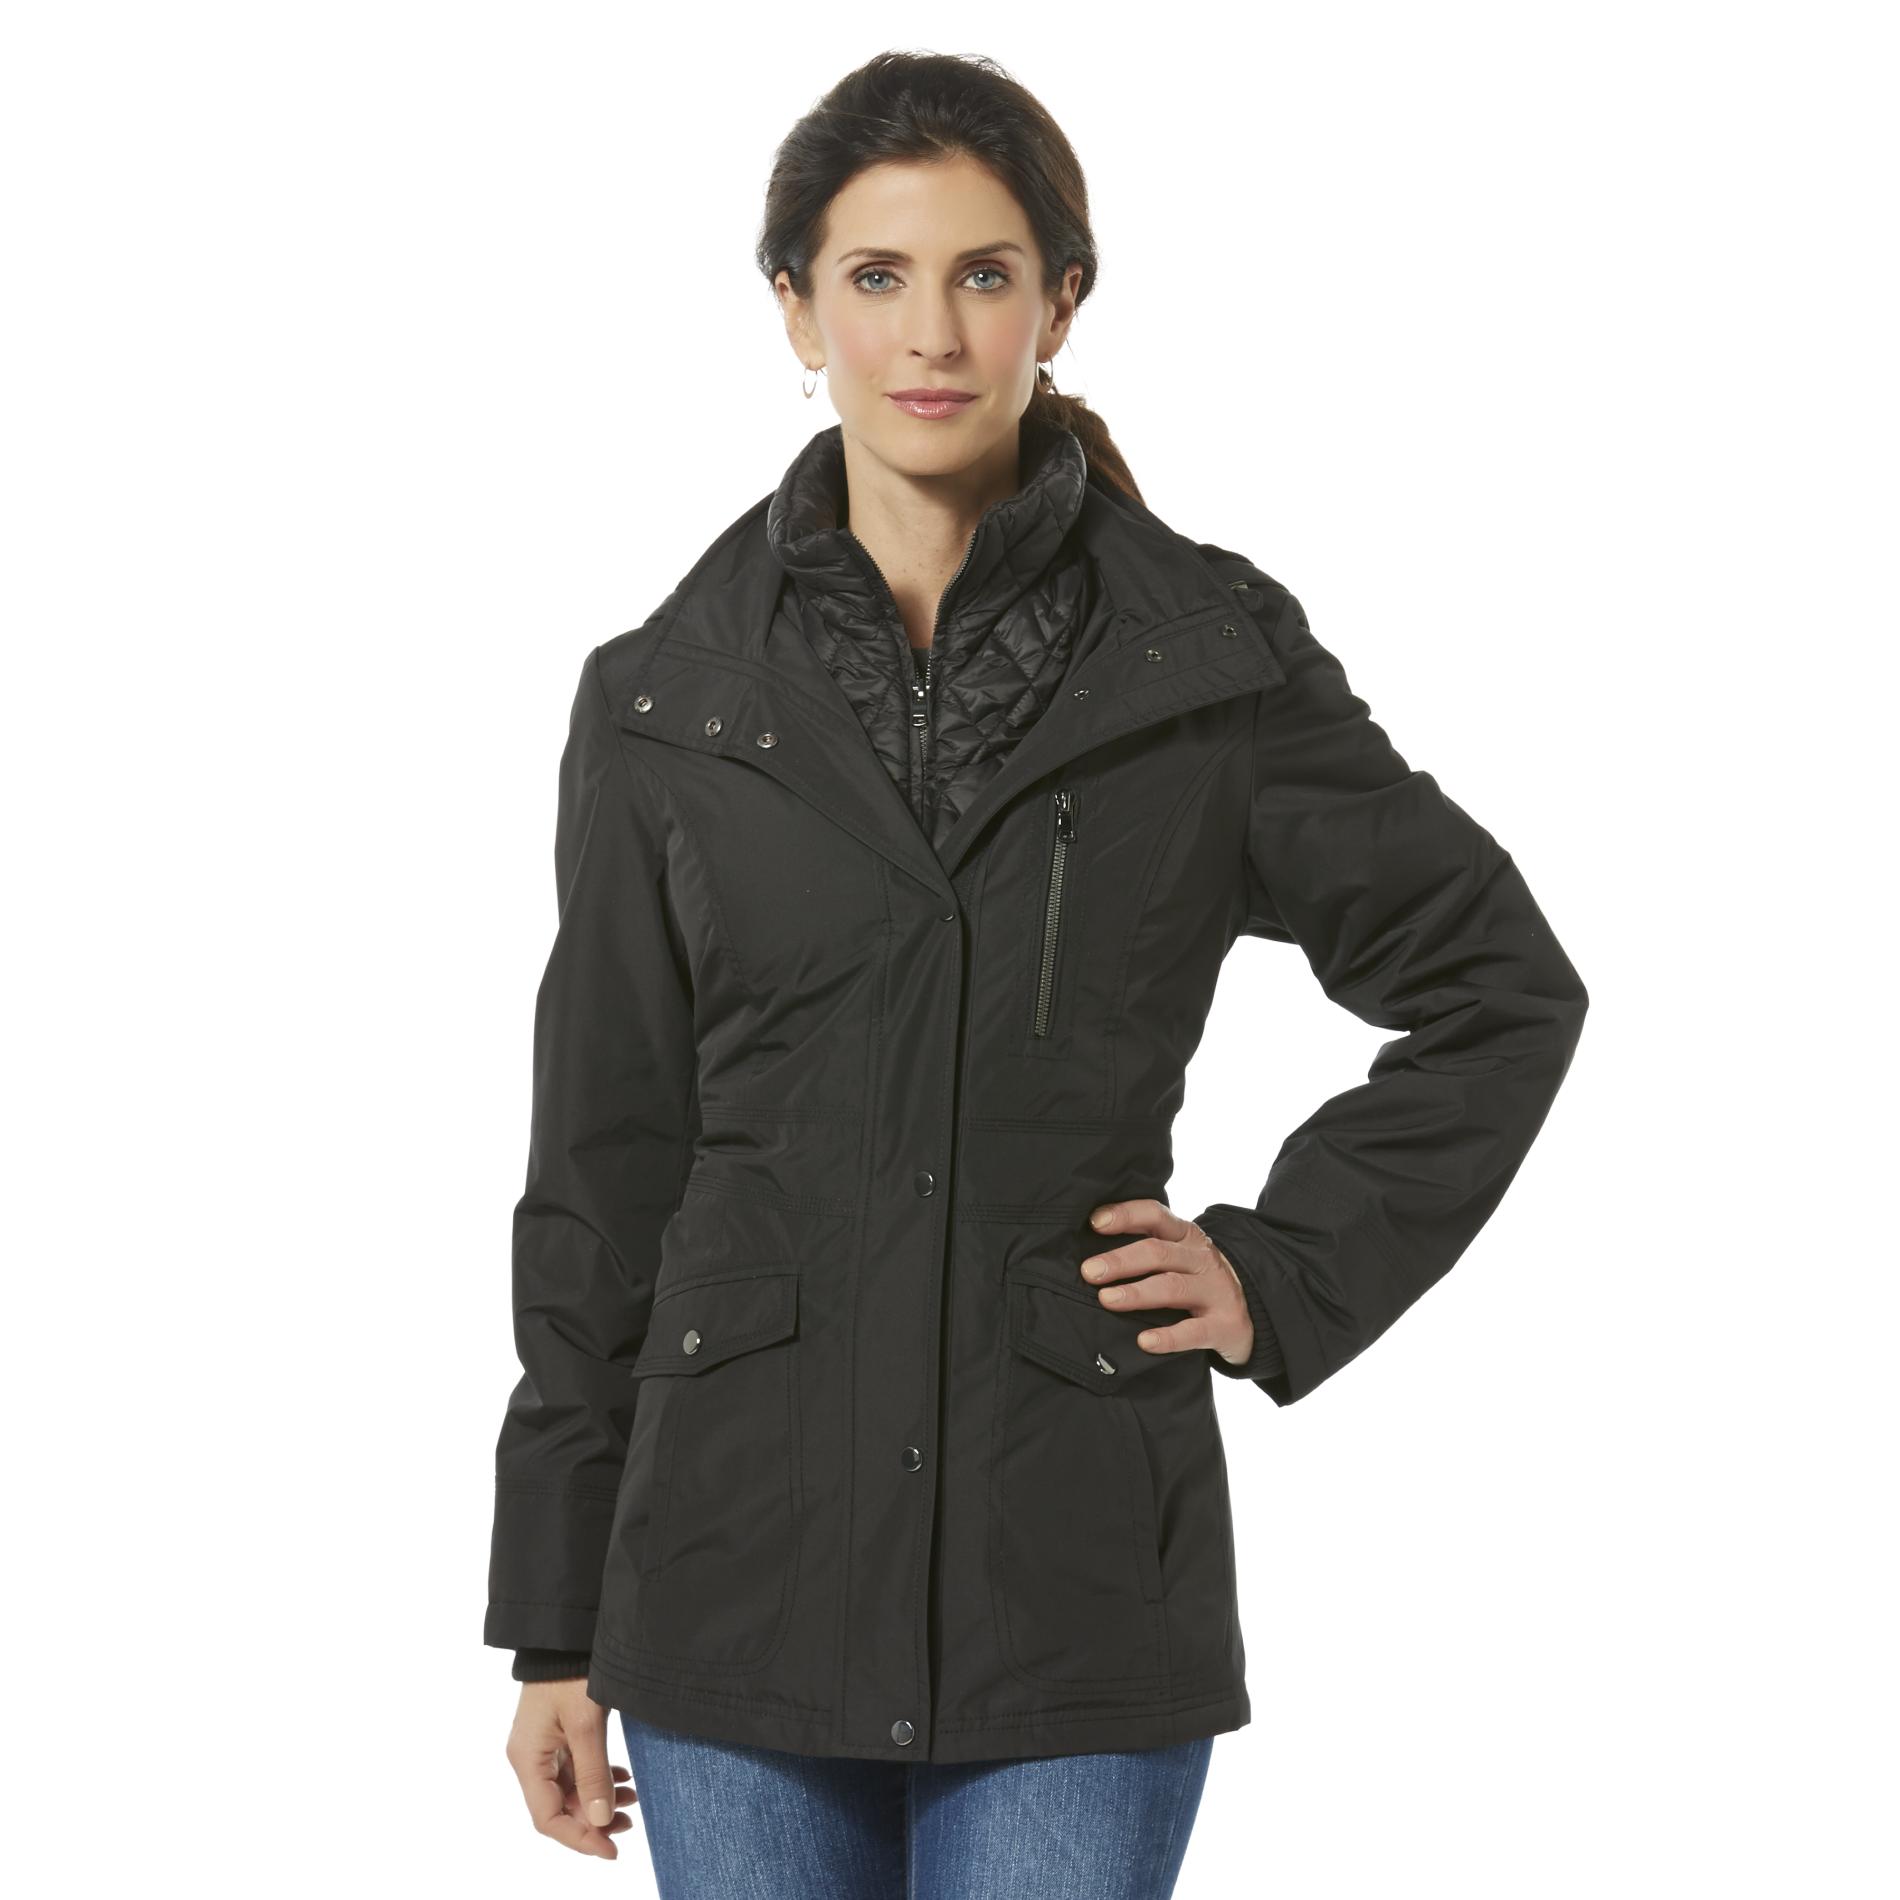 Women’s Winter Coats on Clearance From $12.99!